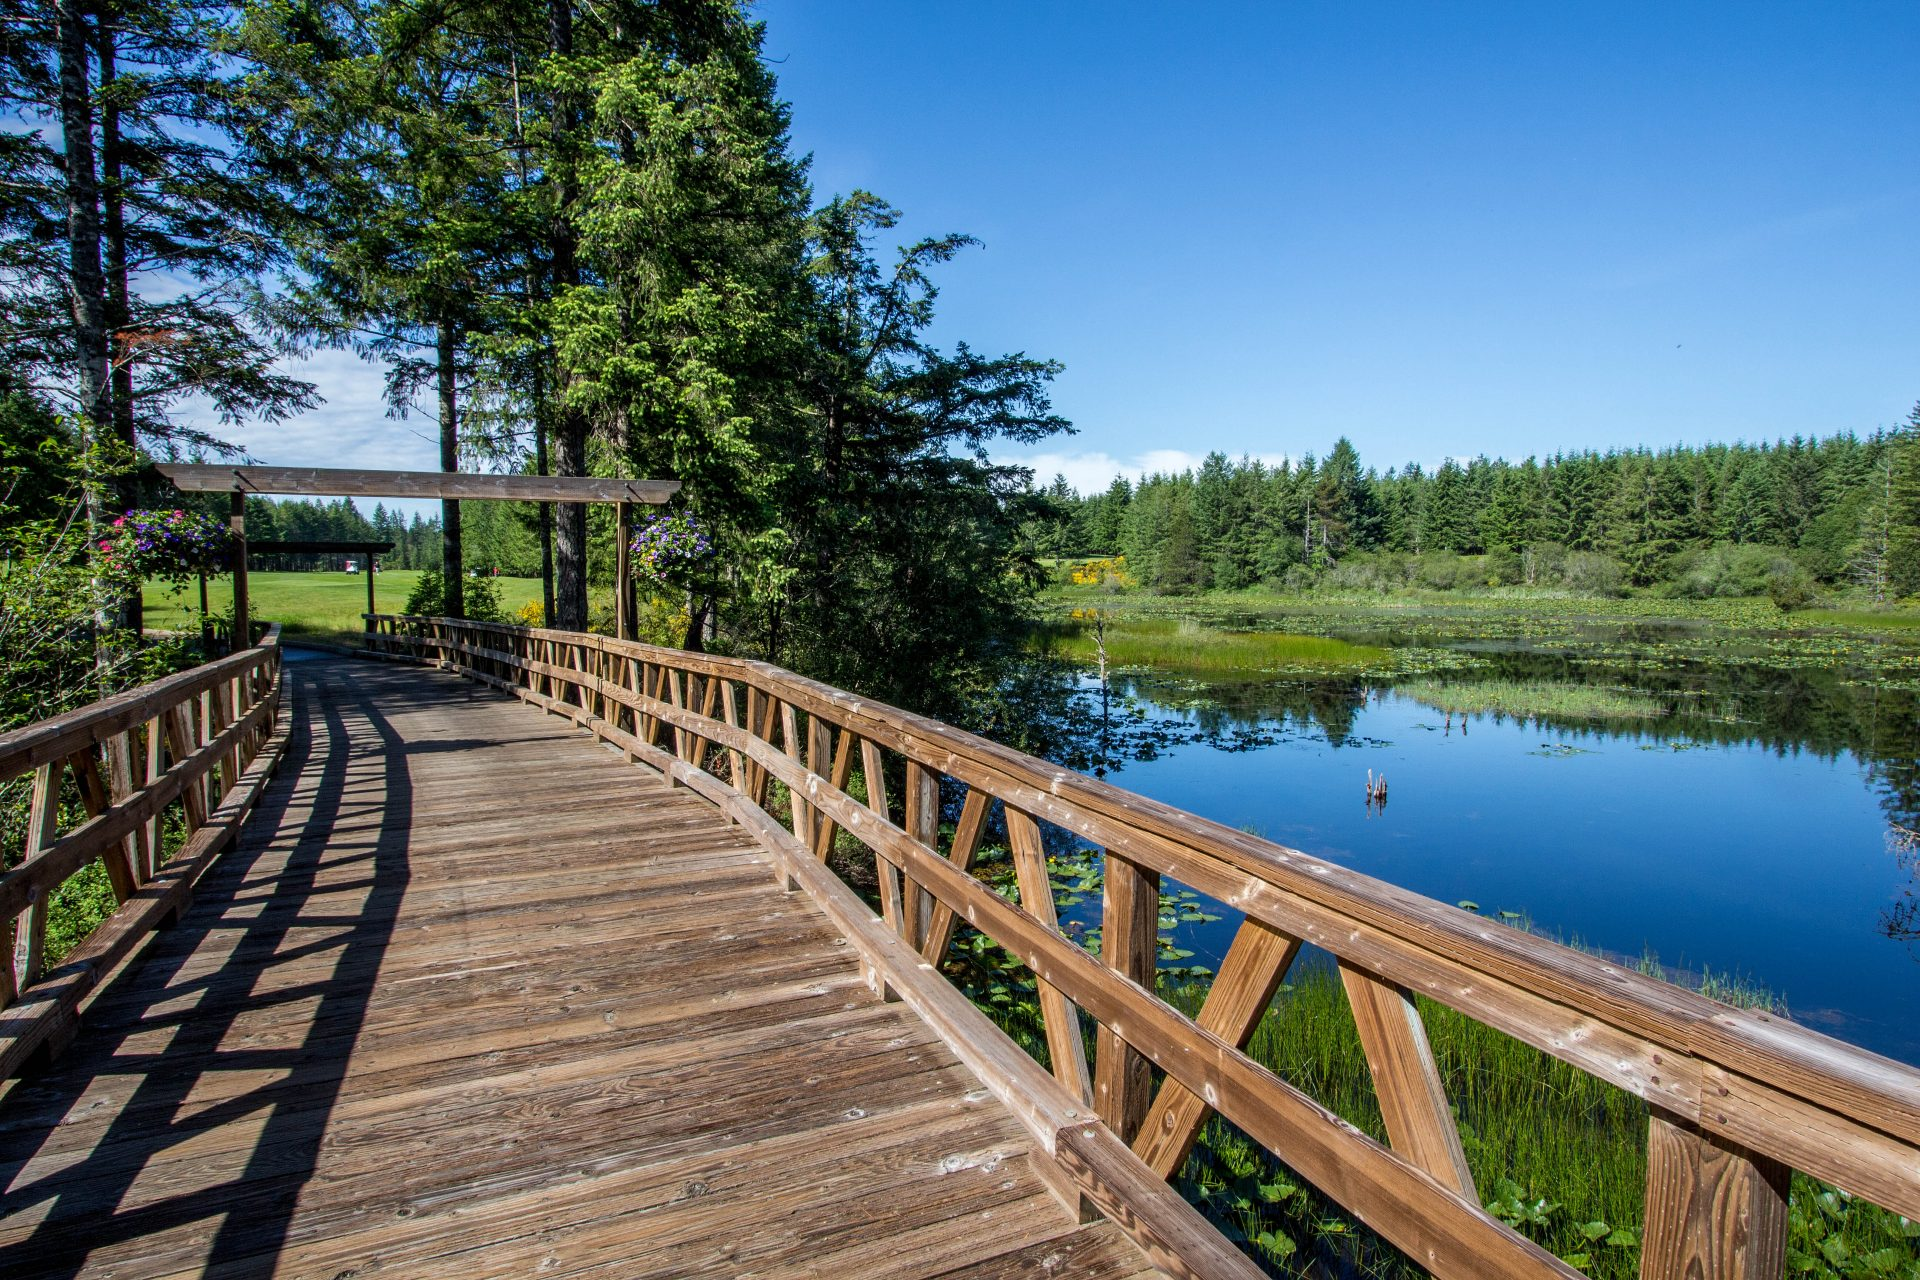 Trophy Lake offers tranquility, PNW beauty, and spacious fairways